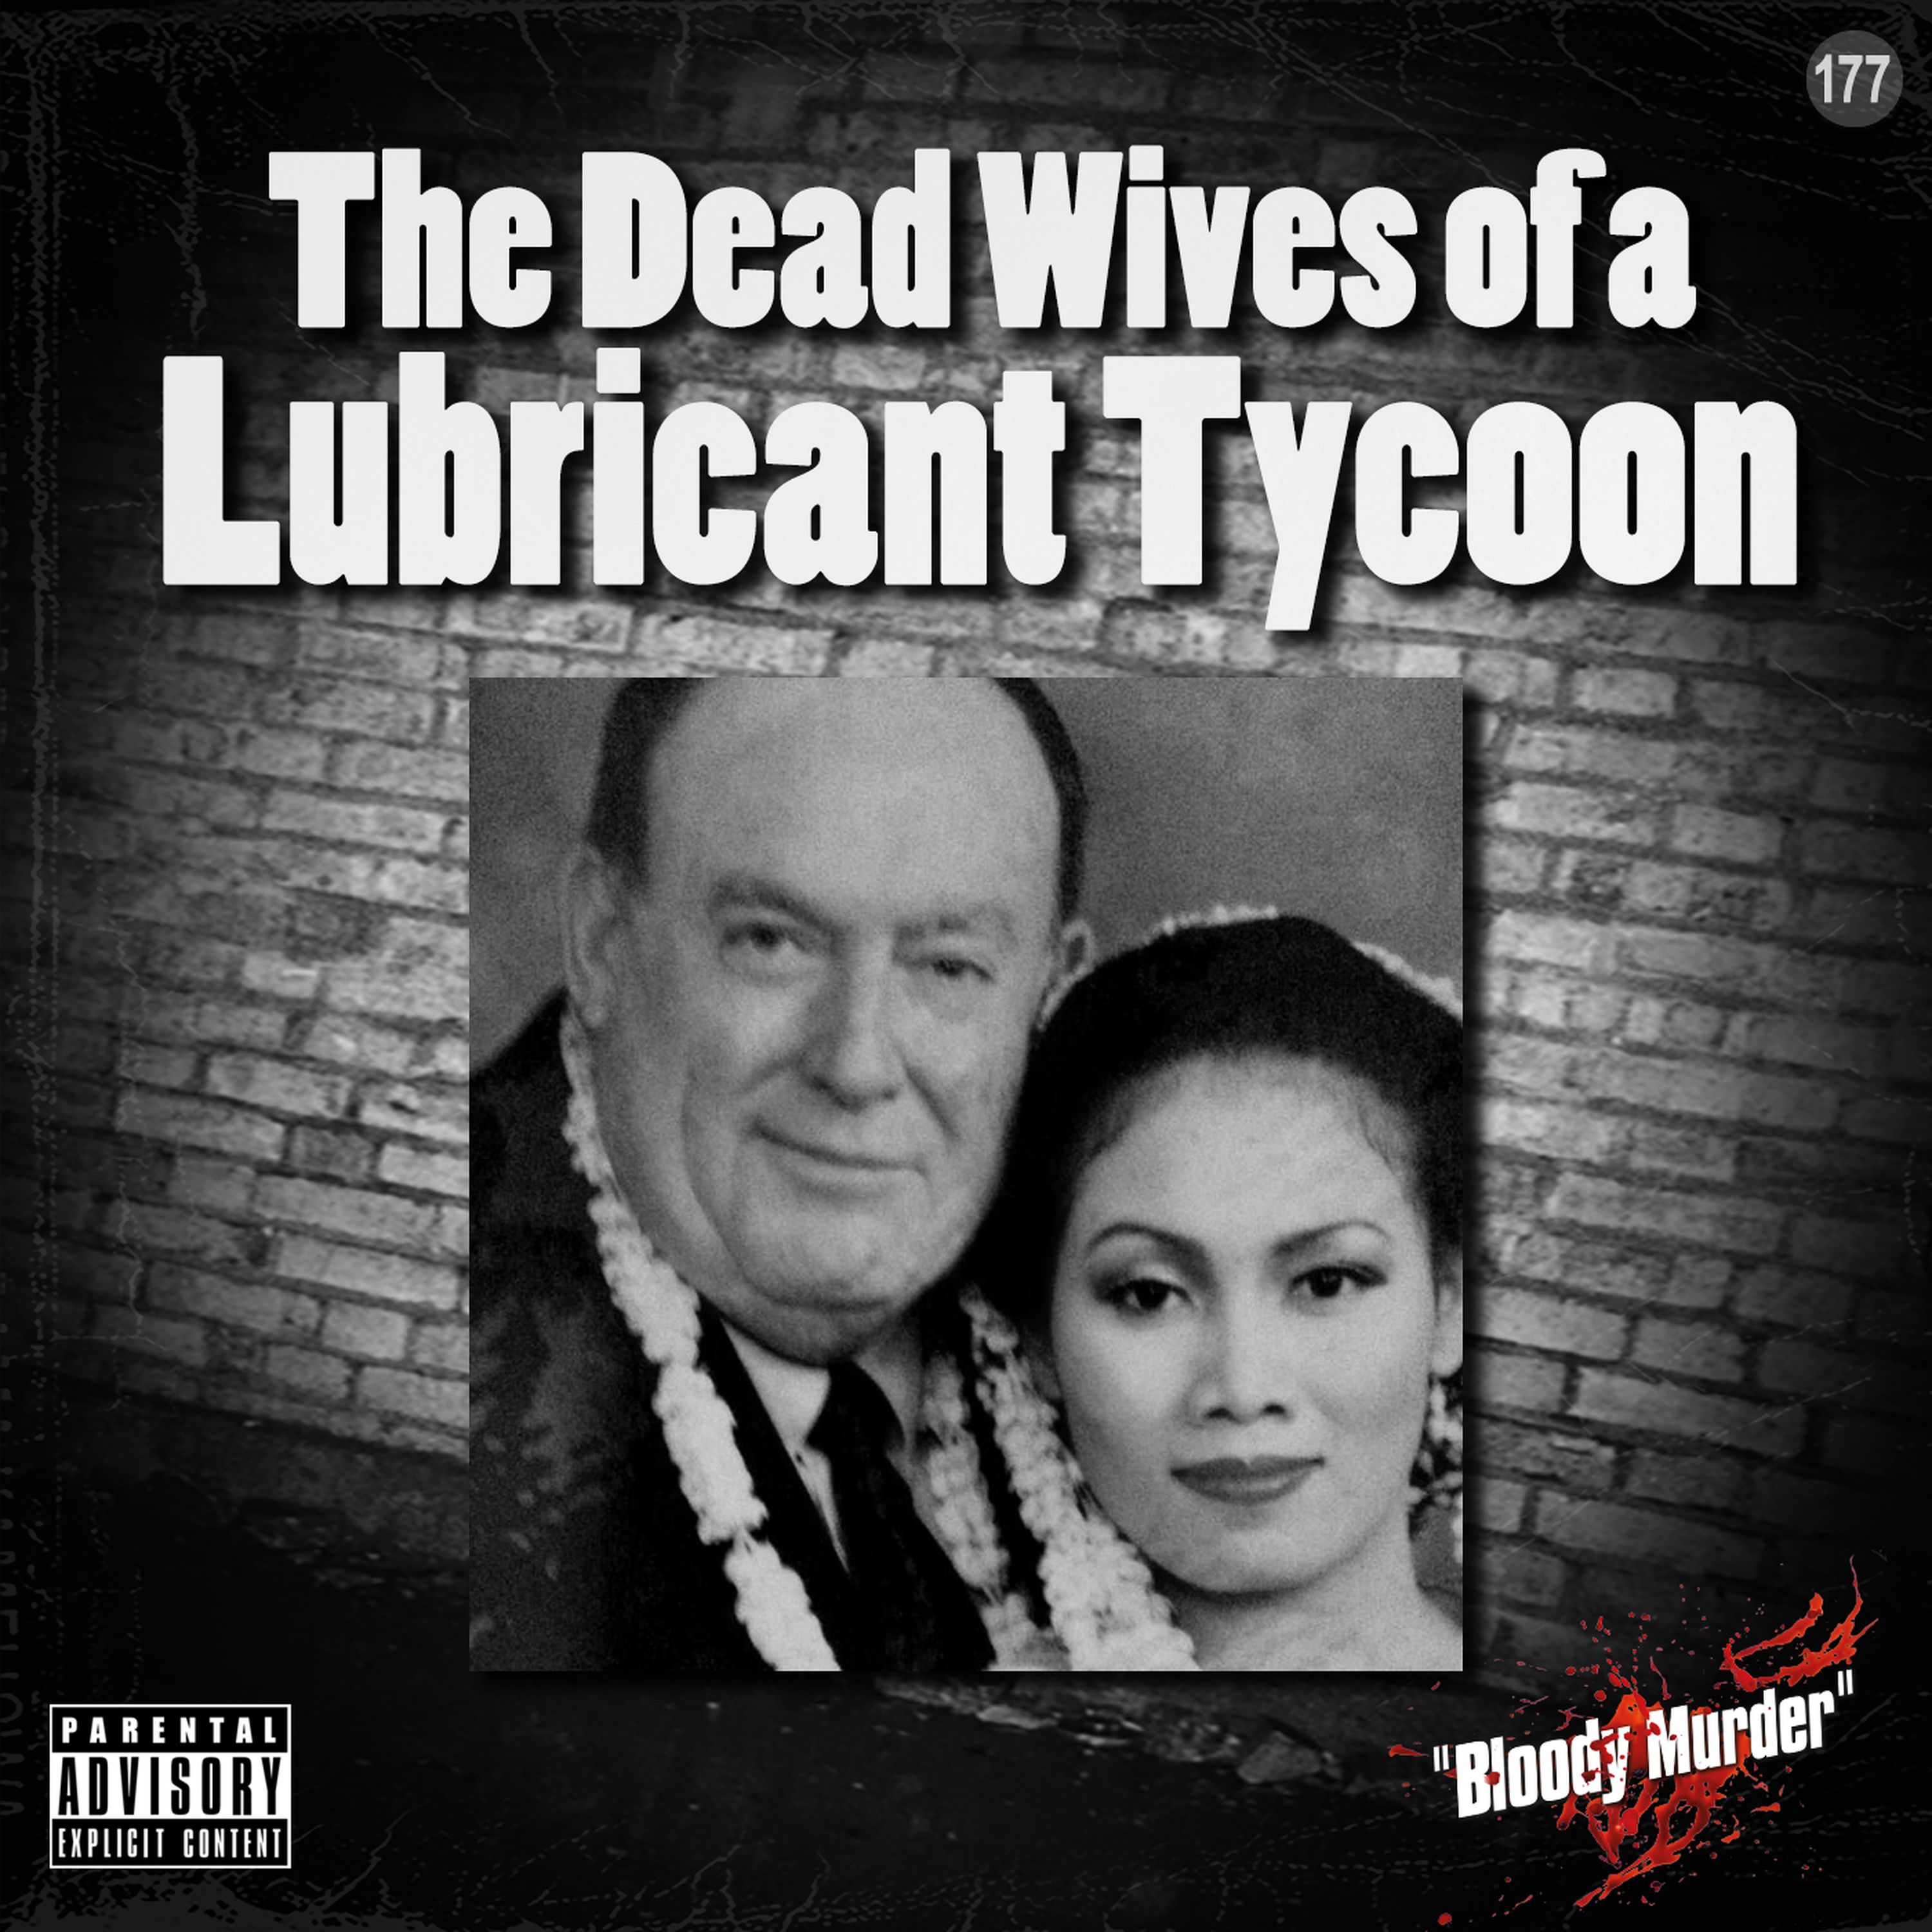 177. The Dead Wives of a Lubricant Tycoon